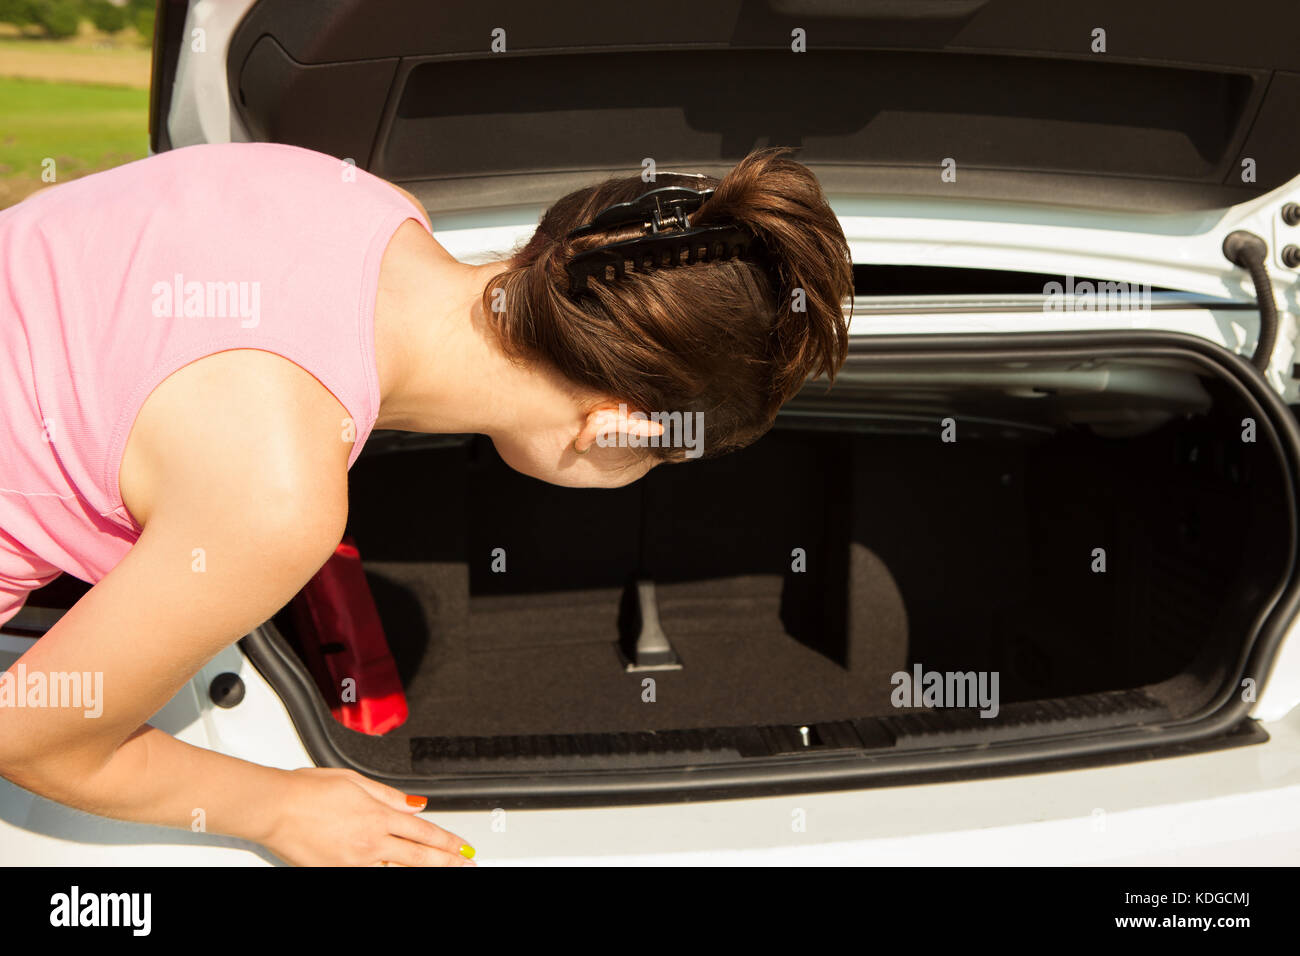 Young Woman Looking In The Car Trunk Stock Photo